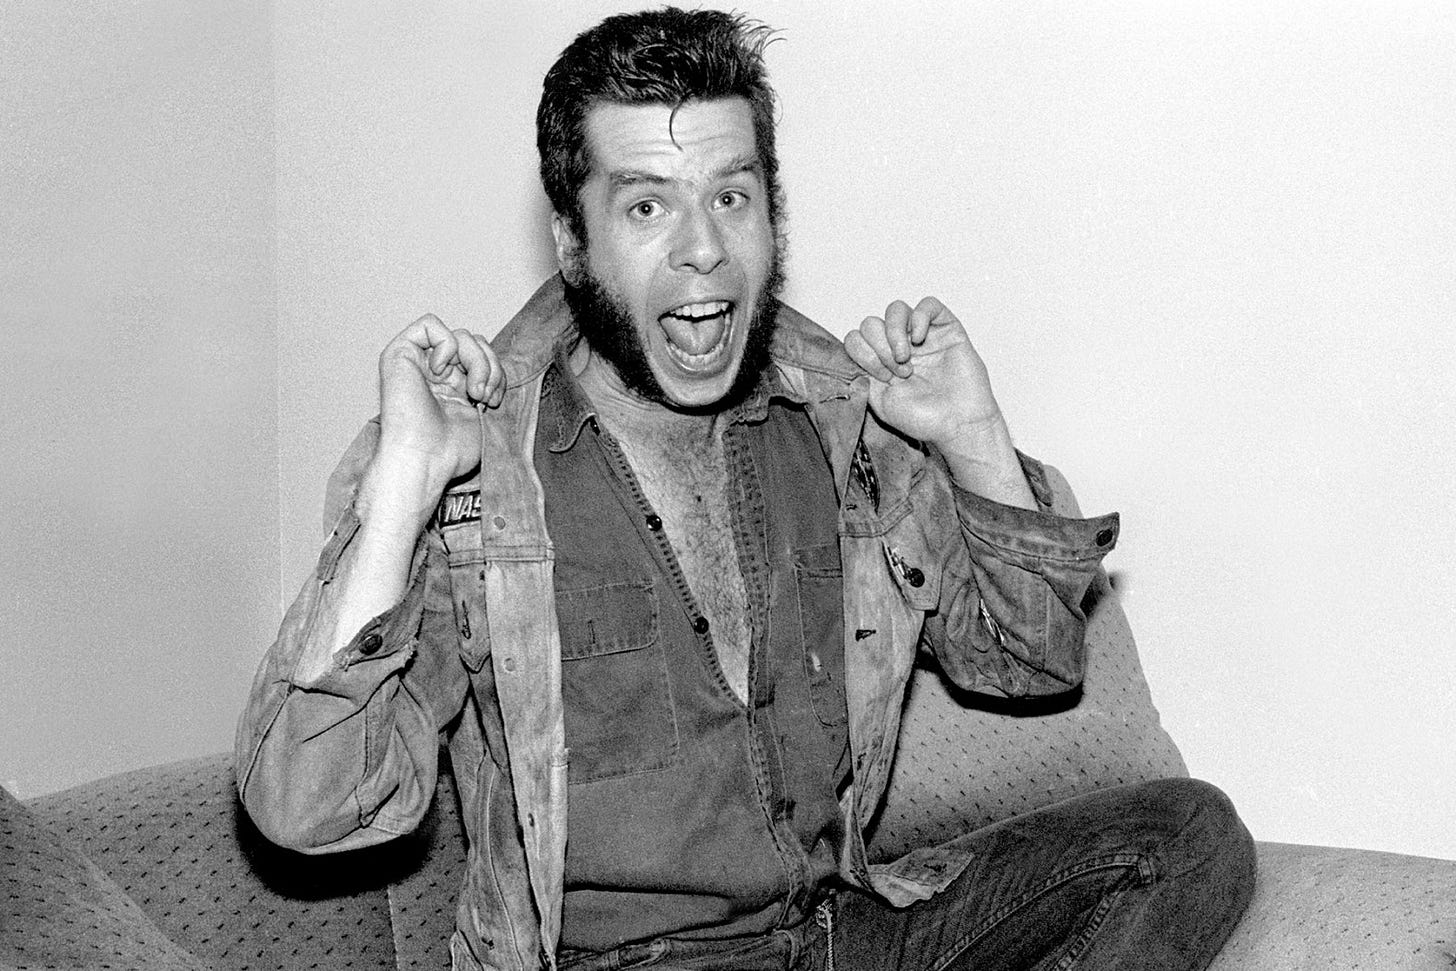 Portrait of Mojo Nixon of Mojo Nixon and Skid Roper at the Poplar Creek Music Theater in Hoffman Estates, Illinois, July 25, 1989. (Photo by Paul Natkin/Getty Images)